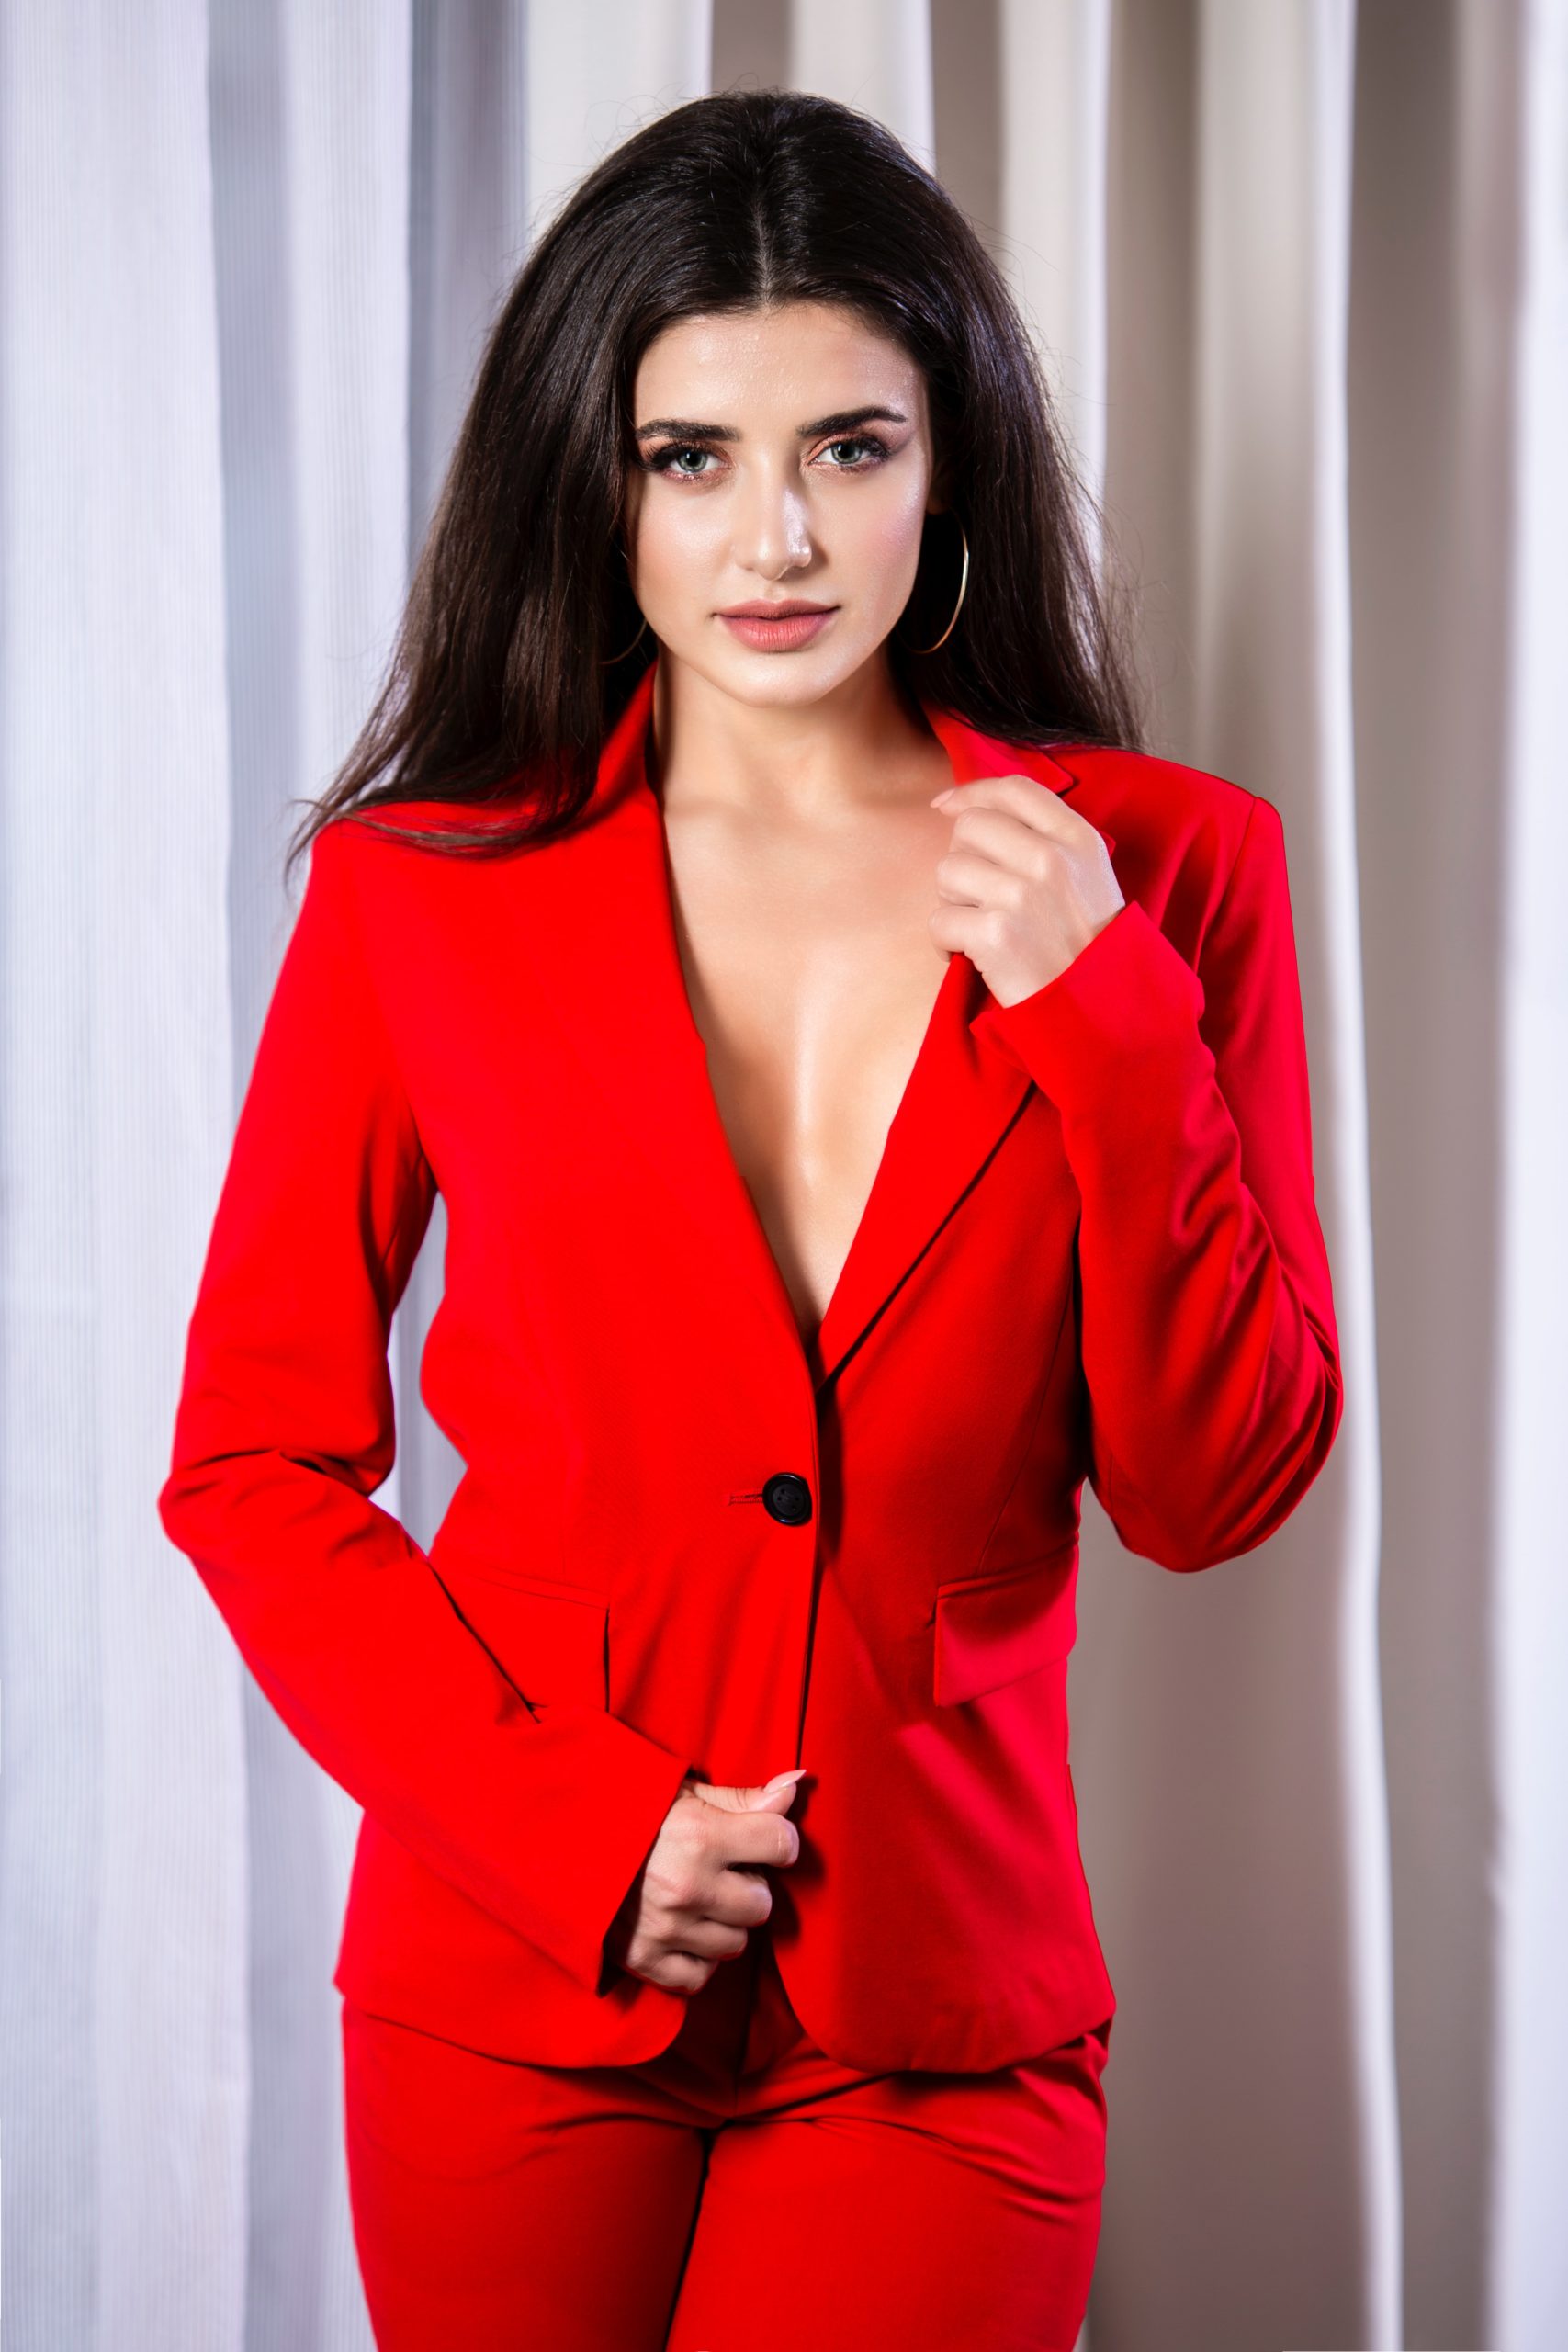 A woman in a red suit